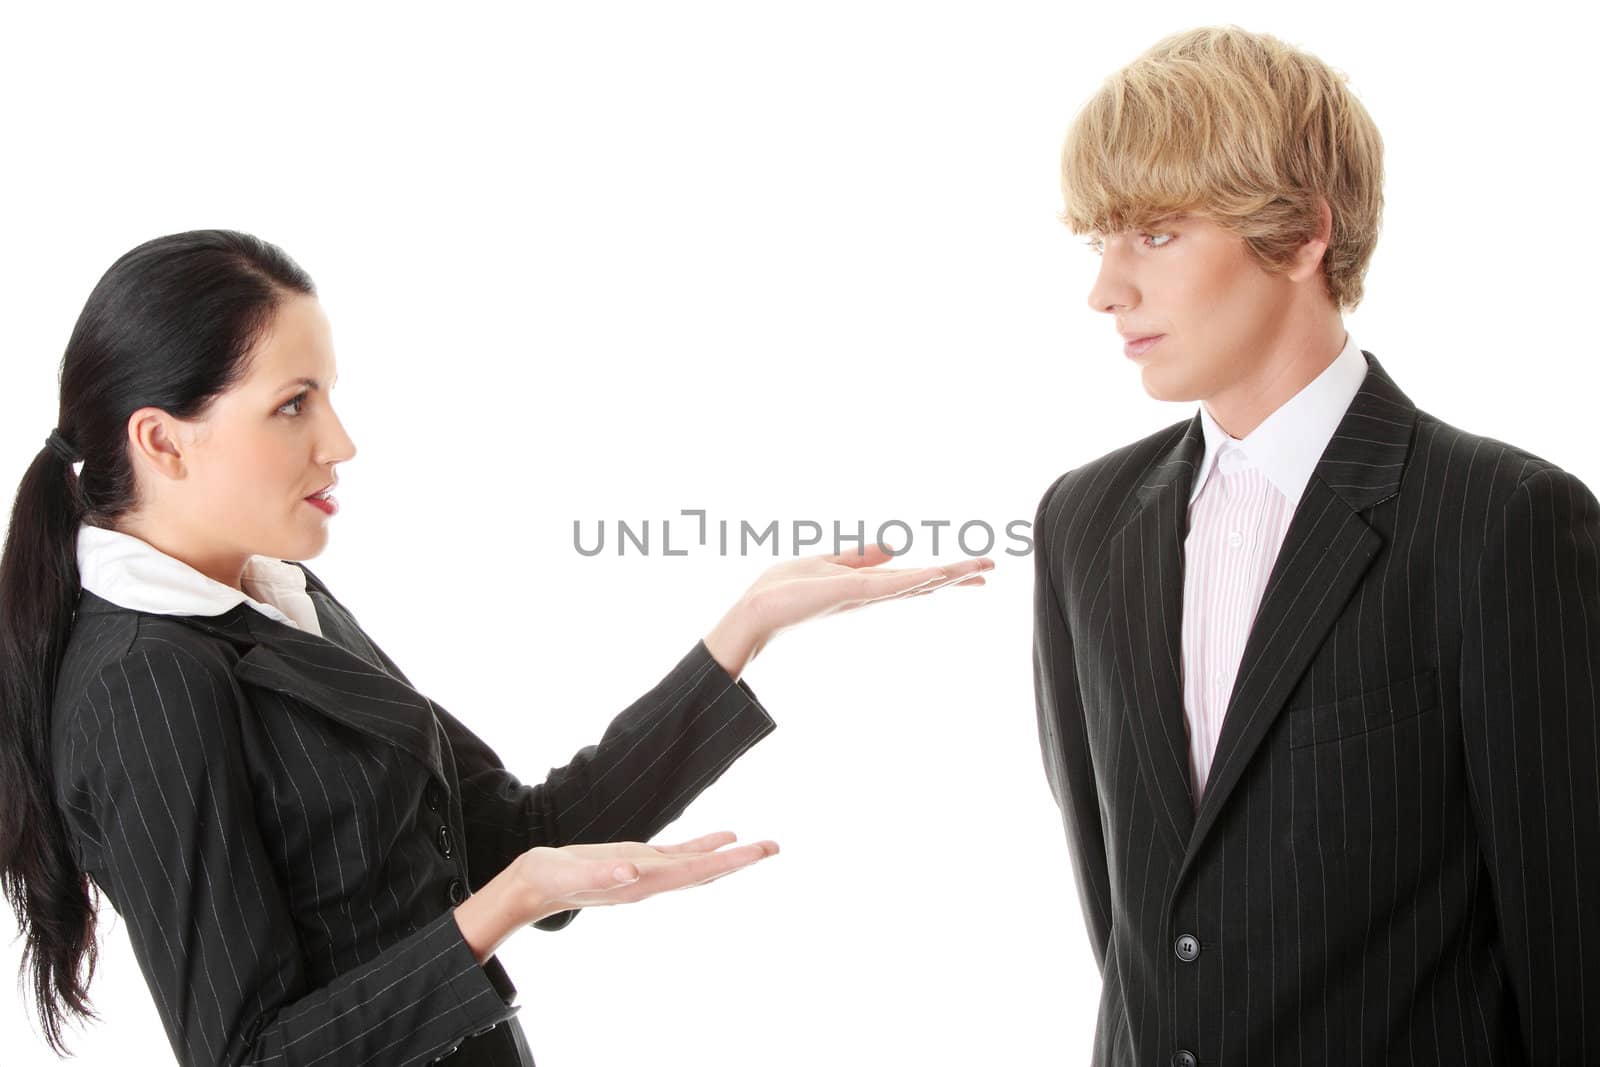 Work Colleagues arguing (woman shouting on man), isolated on white background